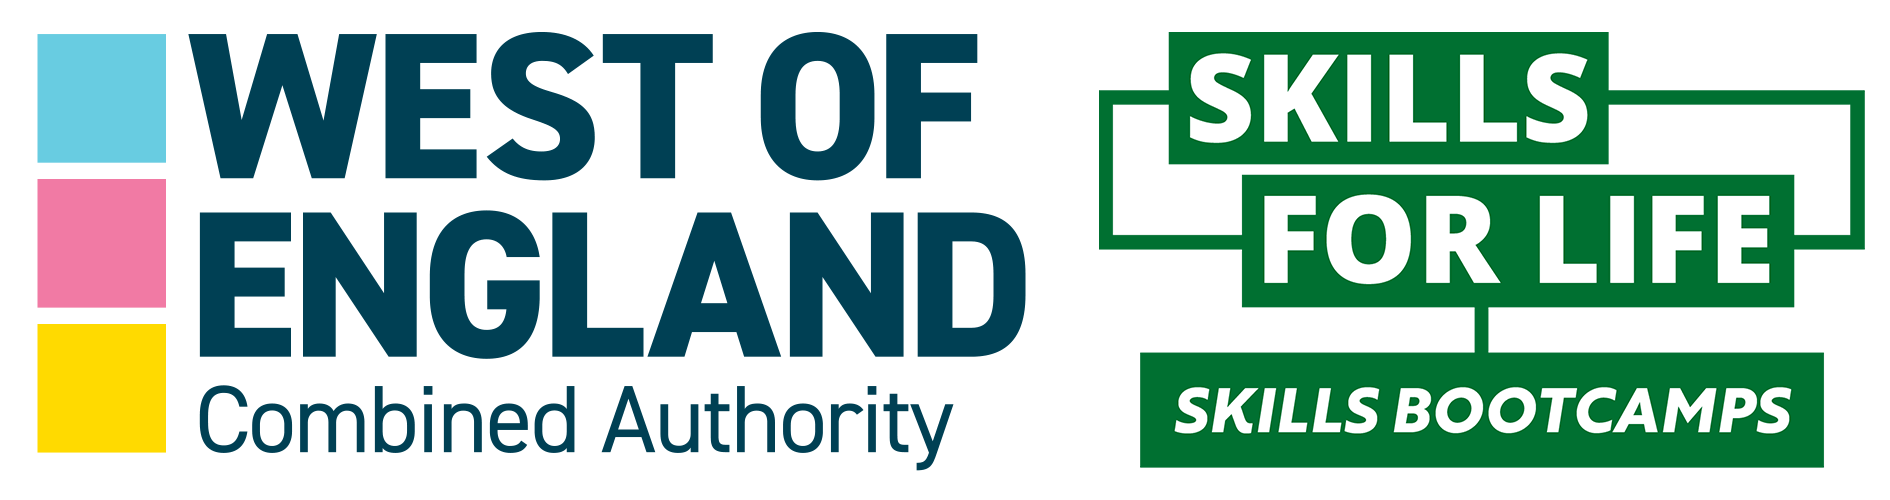 logos for West of England Combined Authority and Skills for Life